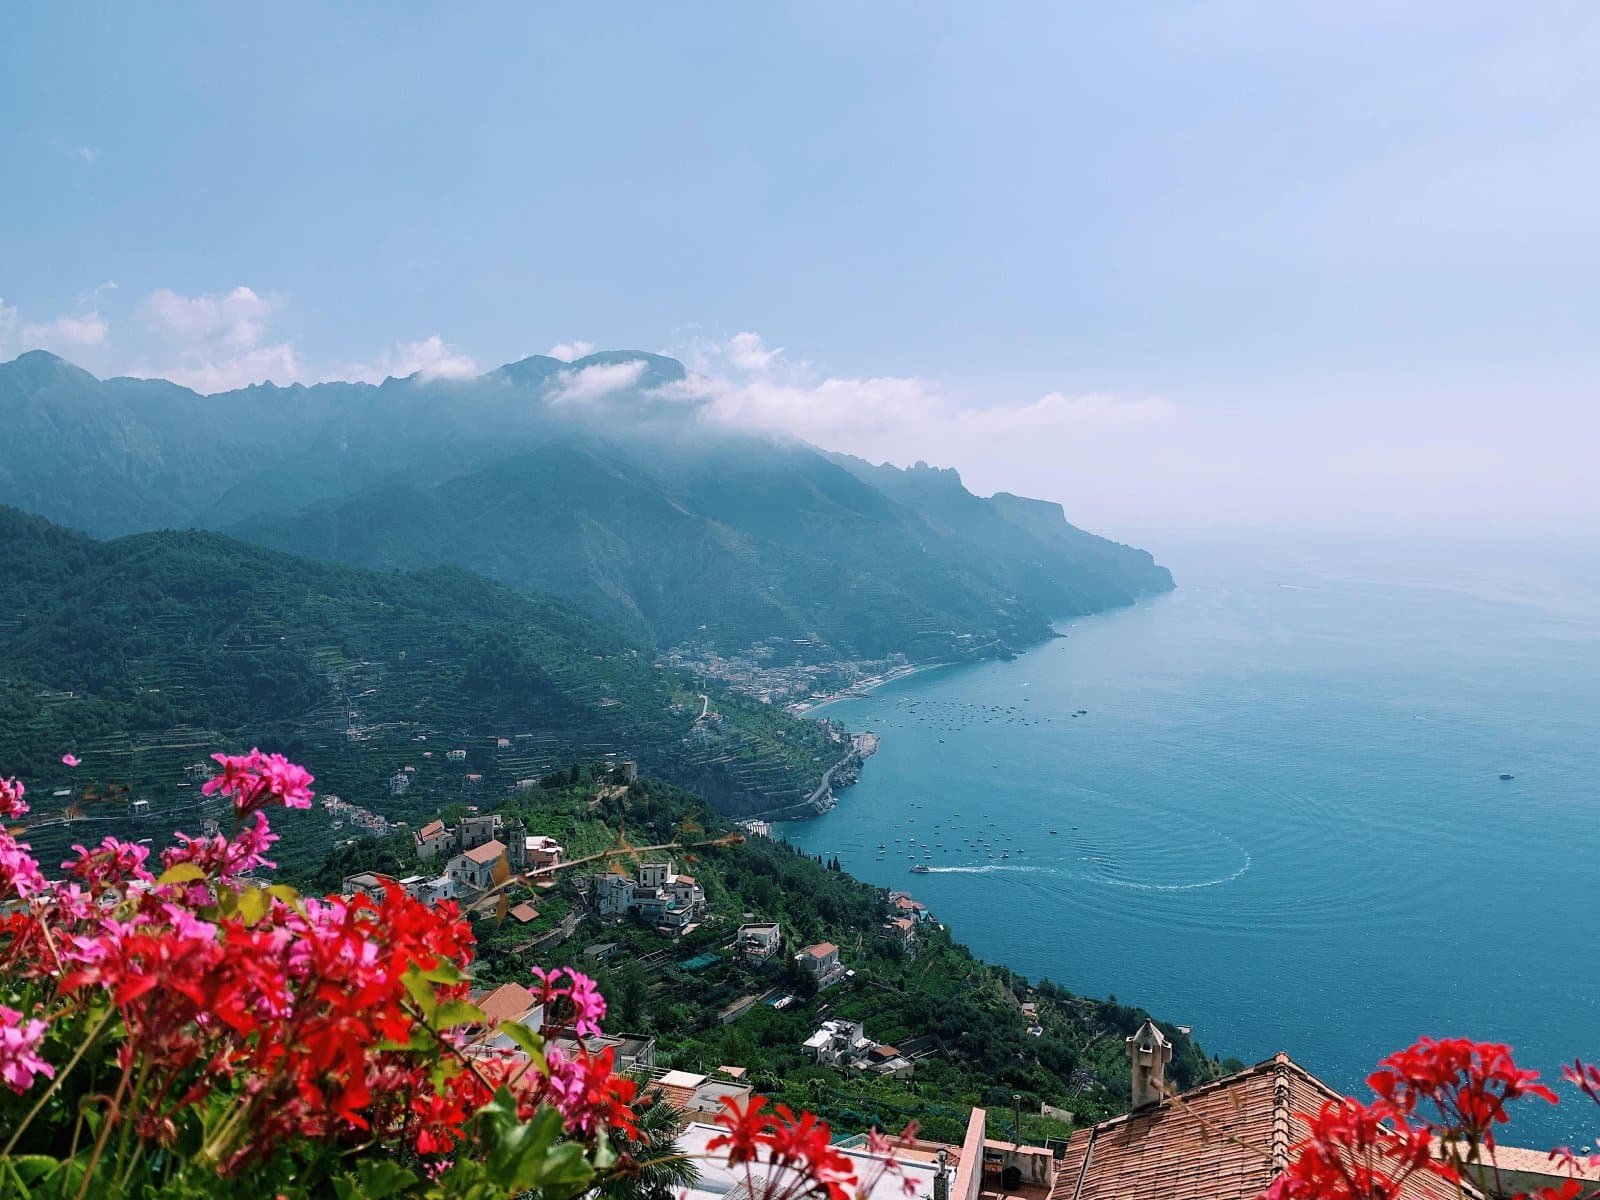 <p class="wp-caption-text">Image Credit: Pexels / Michael Giugliano</p>  <p><span>Perched on a cliff overlooking the Amalfi Coast, the Belmond Hotel Caruso is a restored 11th-century palace offering breathtaking Mediterranean Sea views. The hotel’s infinity pool, seemingly suspended between sea and sky, is one of its most iconic features, providing a serene oasis of luxury. The rooms and suites are elegantly furnished, blending historical details with contemporary comfort, and many offer private terraces or gardens with panoramic views. The hotel’s gardens, filled with roses, jasmine, and citrus trees, celebrate the region’s natural beauty. Dining at the Belmond Hotel Caruso is an experience in itself, with the Belvedere Restaurant offering exquisite Italian cuisine in an unforgettable setting.</span></p>